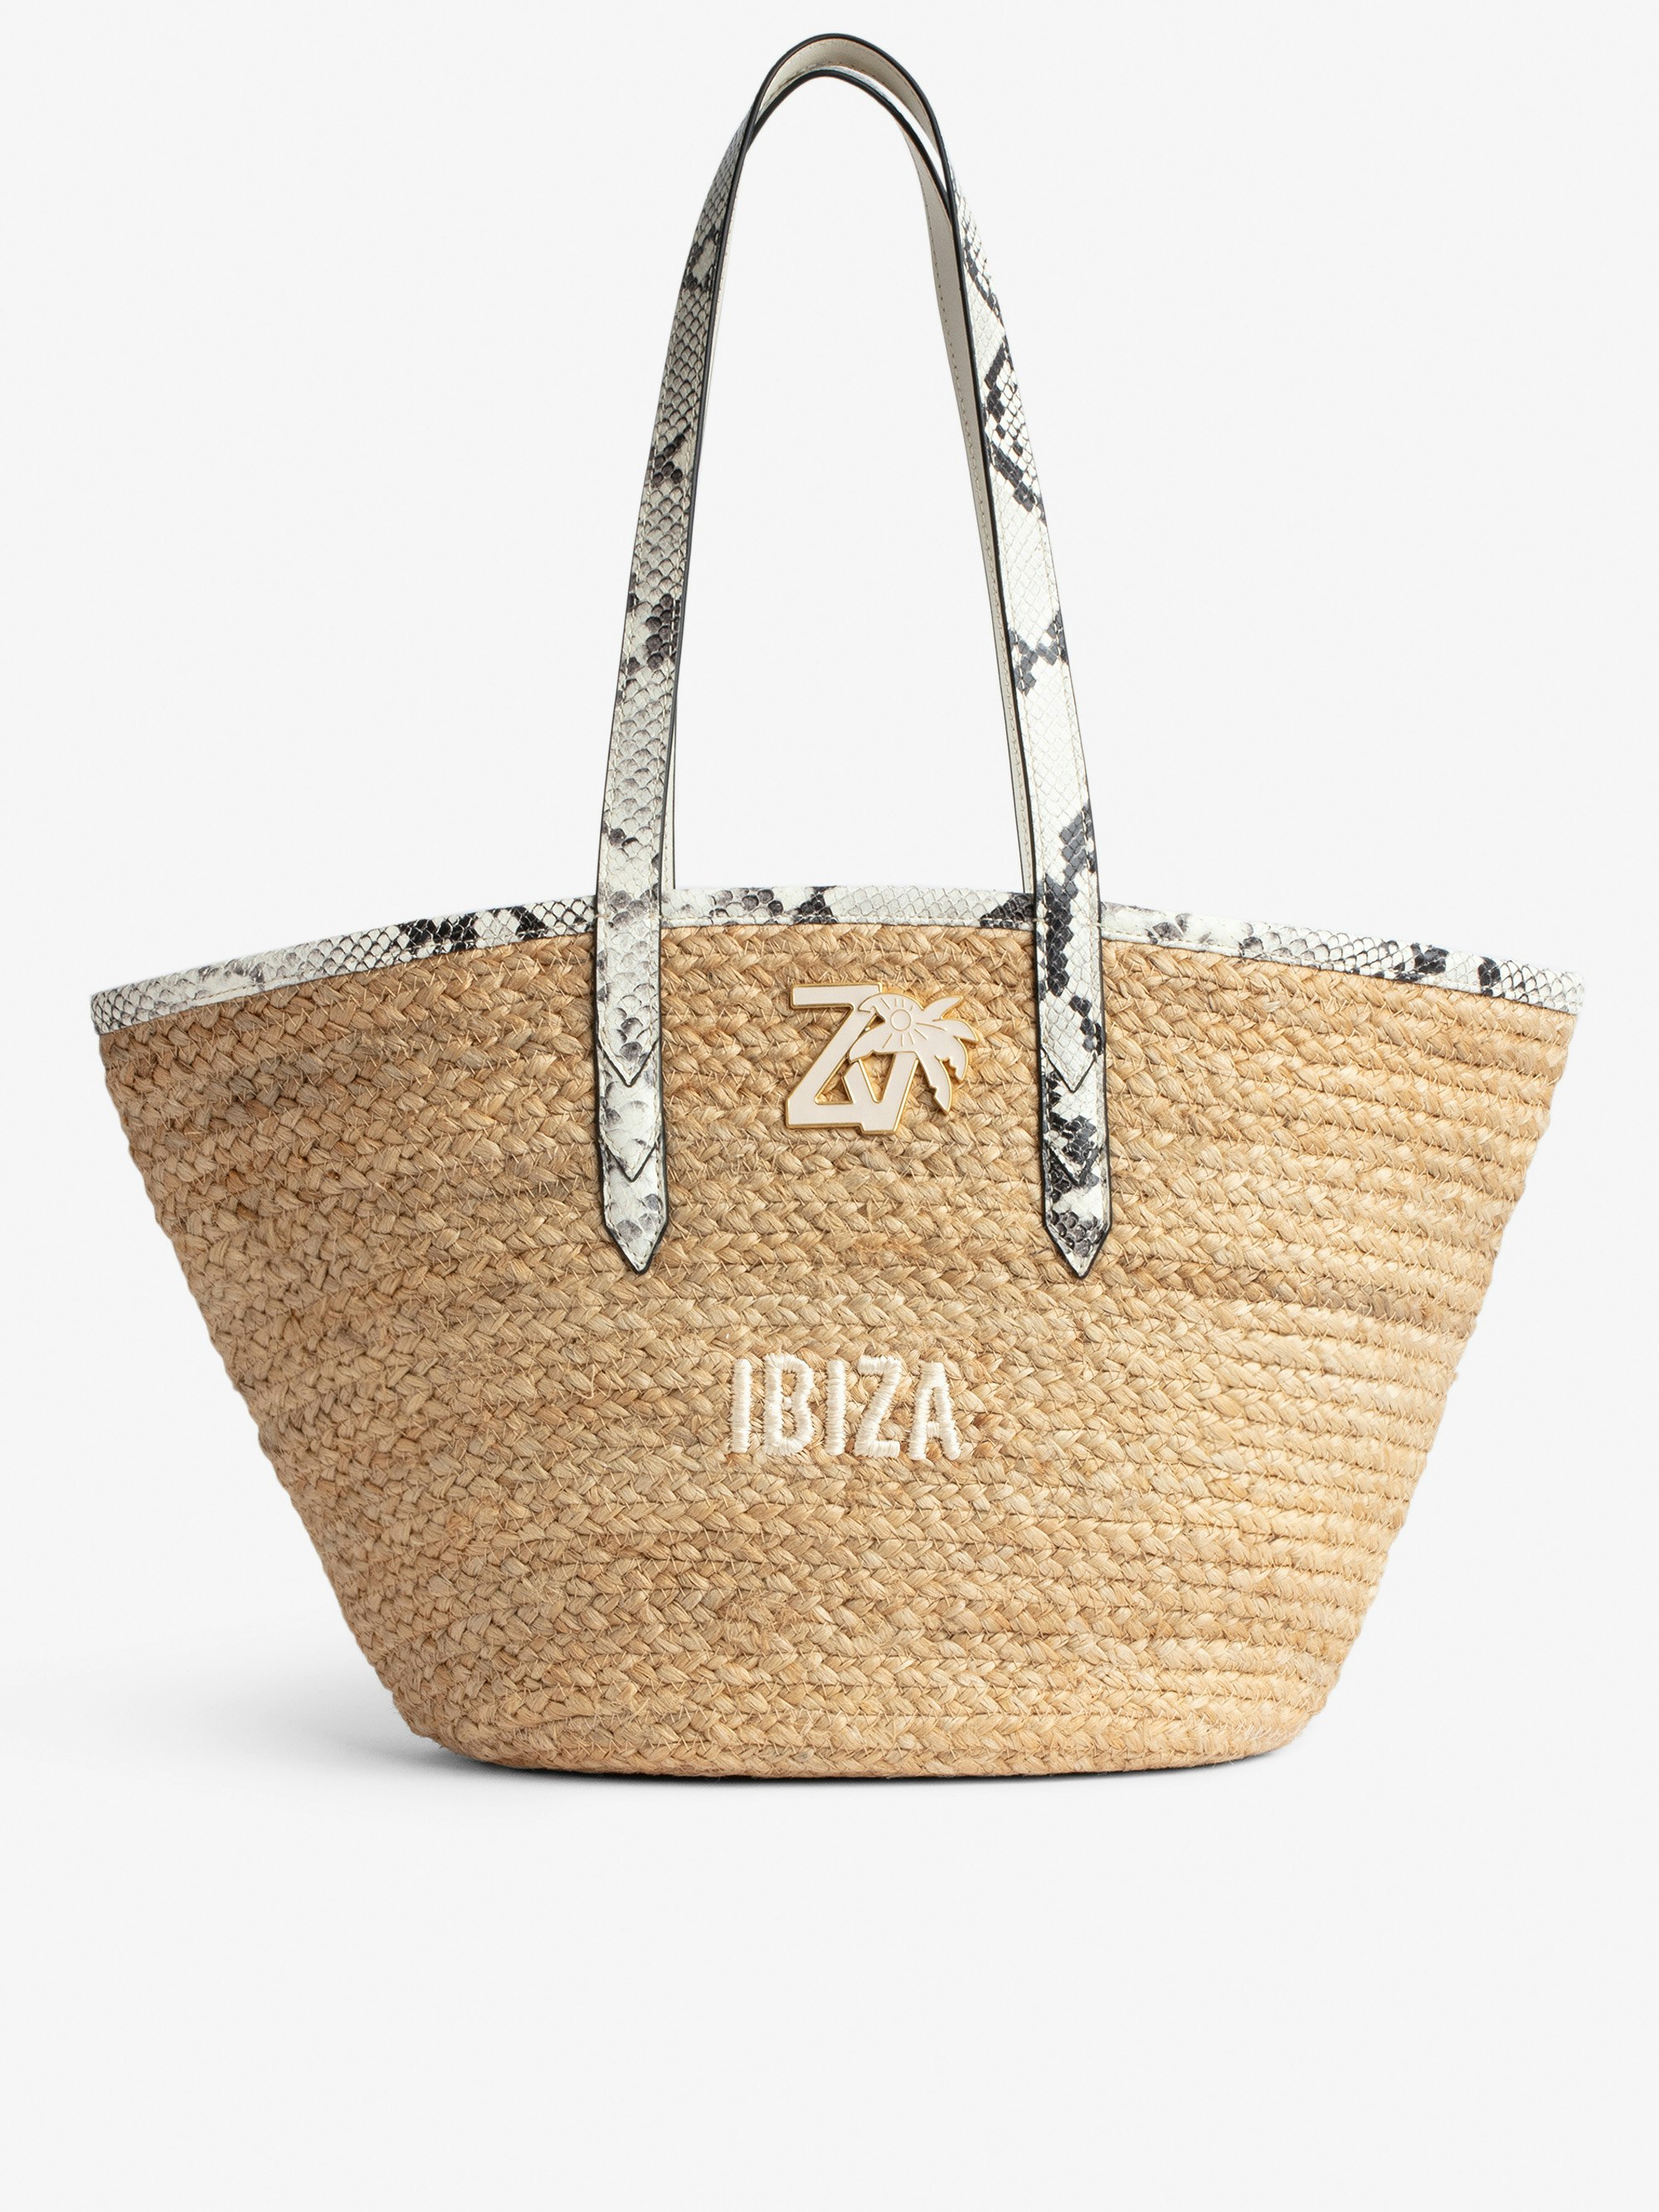 Le Beach Bag - Women's straw bag with off-white snakeskin-effect leather handles, "Ibiza" embroidery and ZV charm